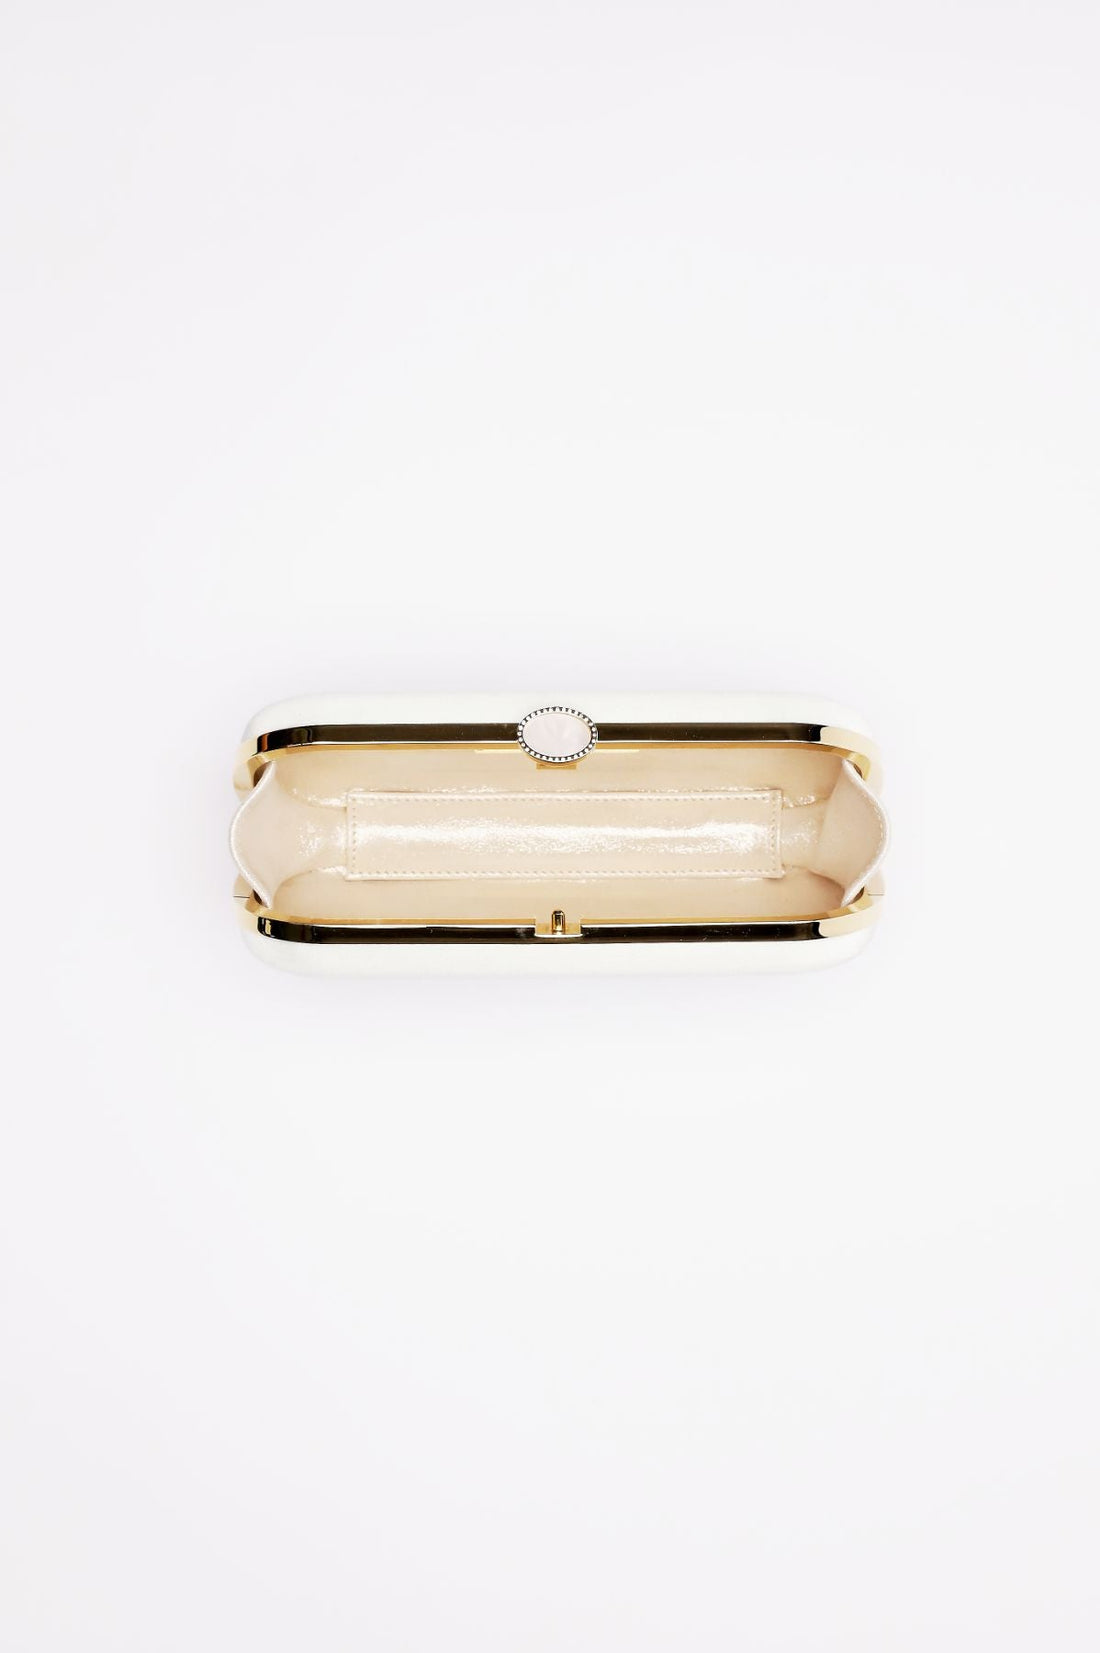 Top open view of Bella Clutch in Sage Green satin with silver hardware frame.